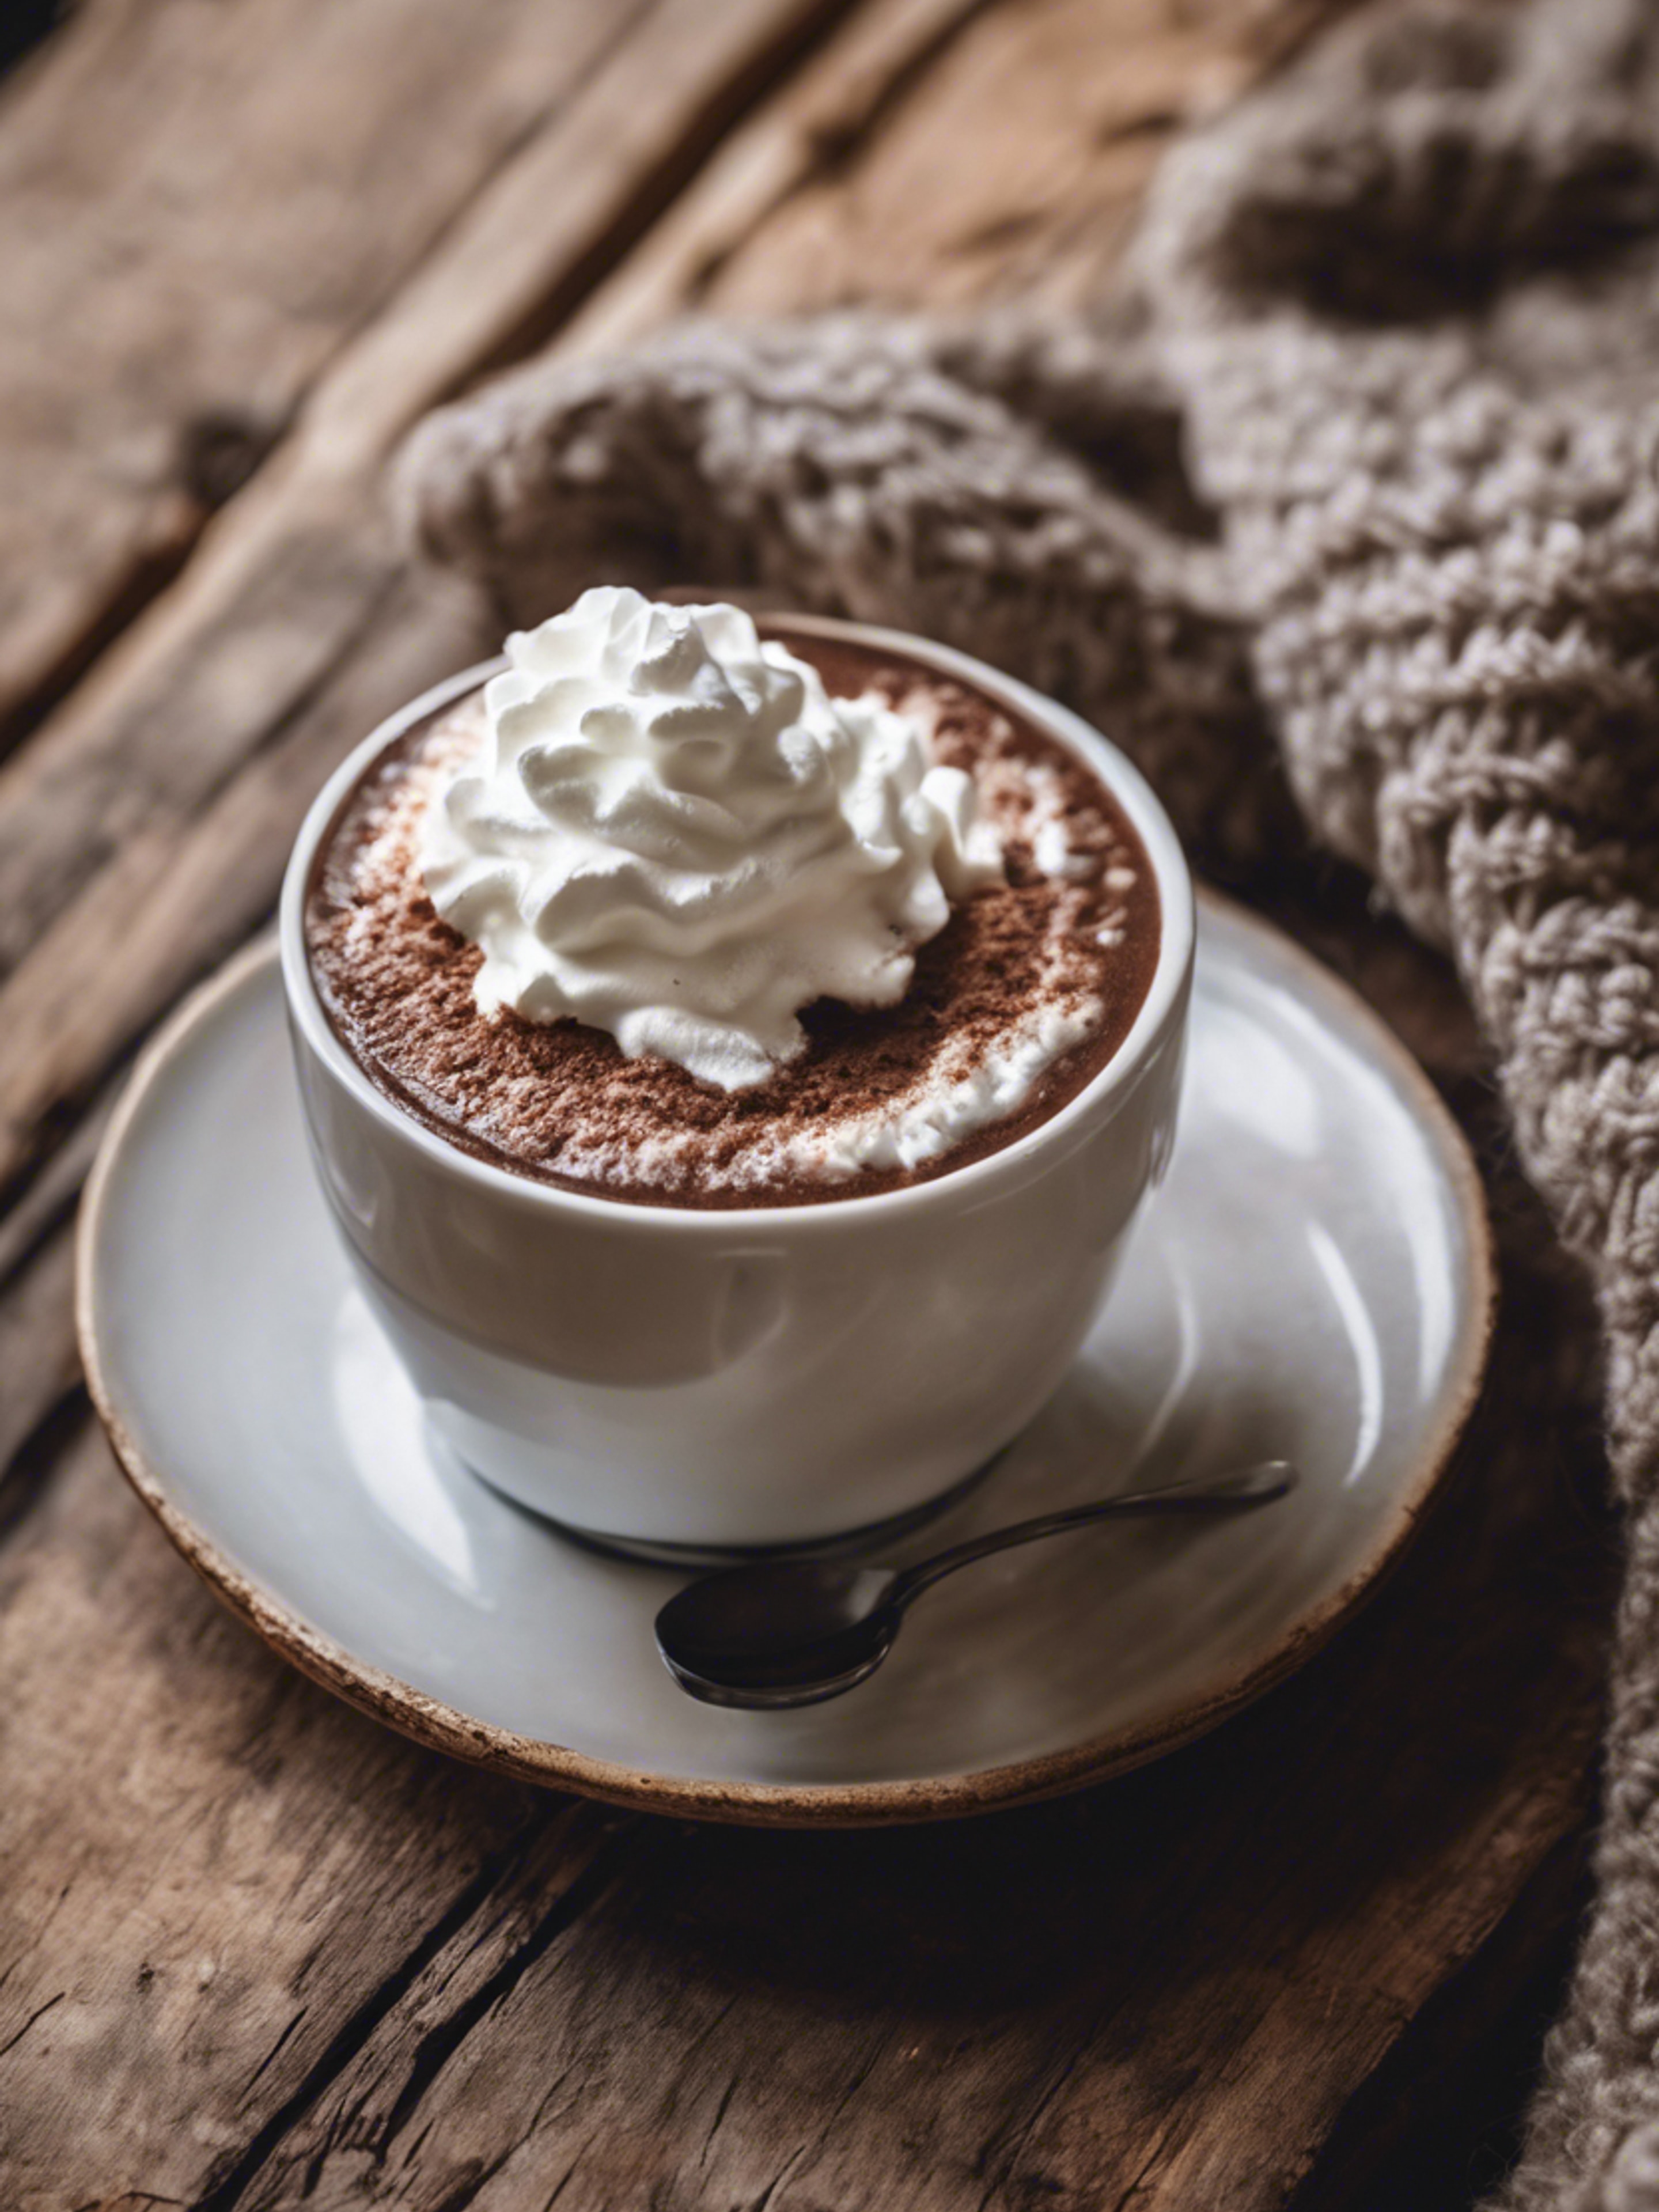 A porcelain cup of steaming hot chocolate topped with whipped cream, next to a crochet coaster on a rough wooden table. Обои[f8ececc79cde48c88690]